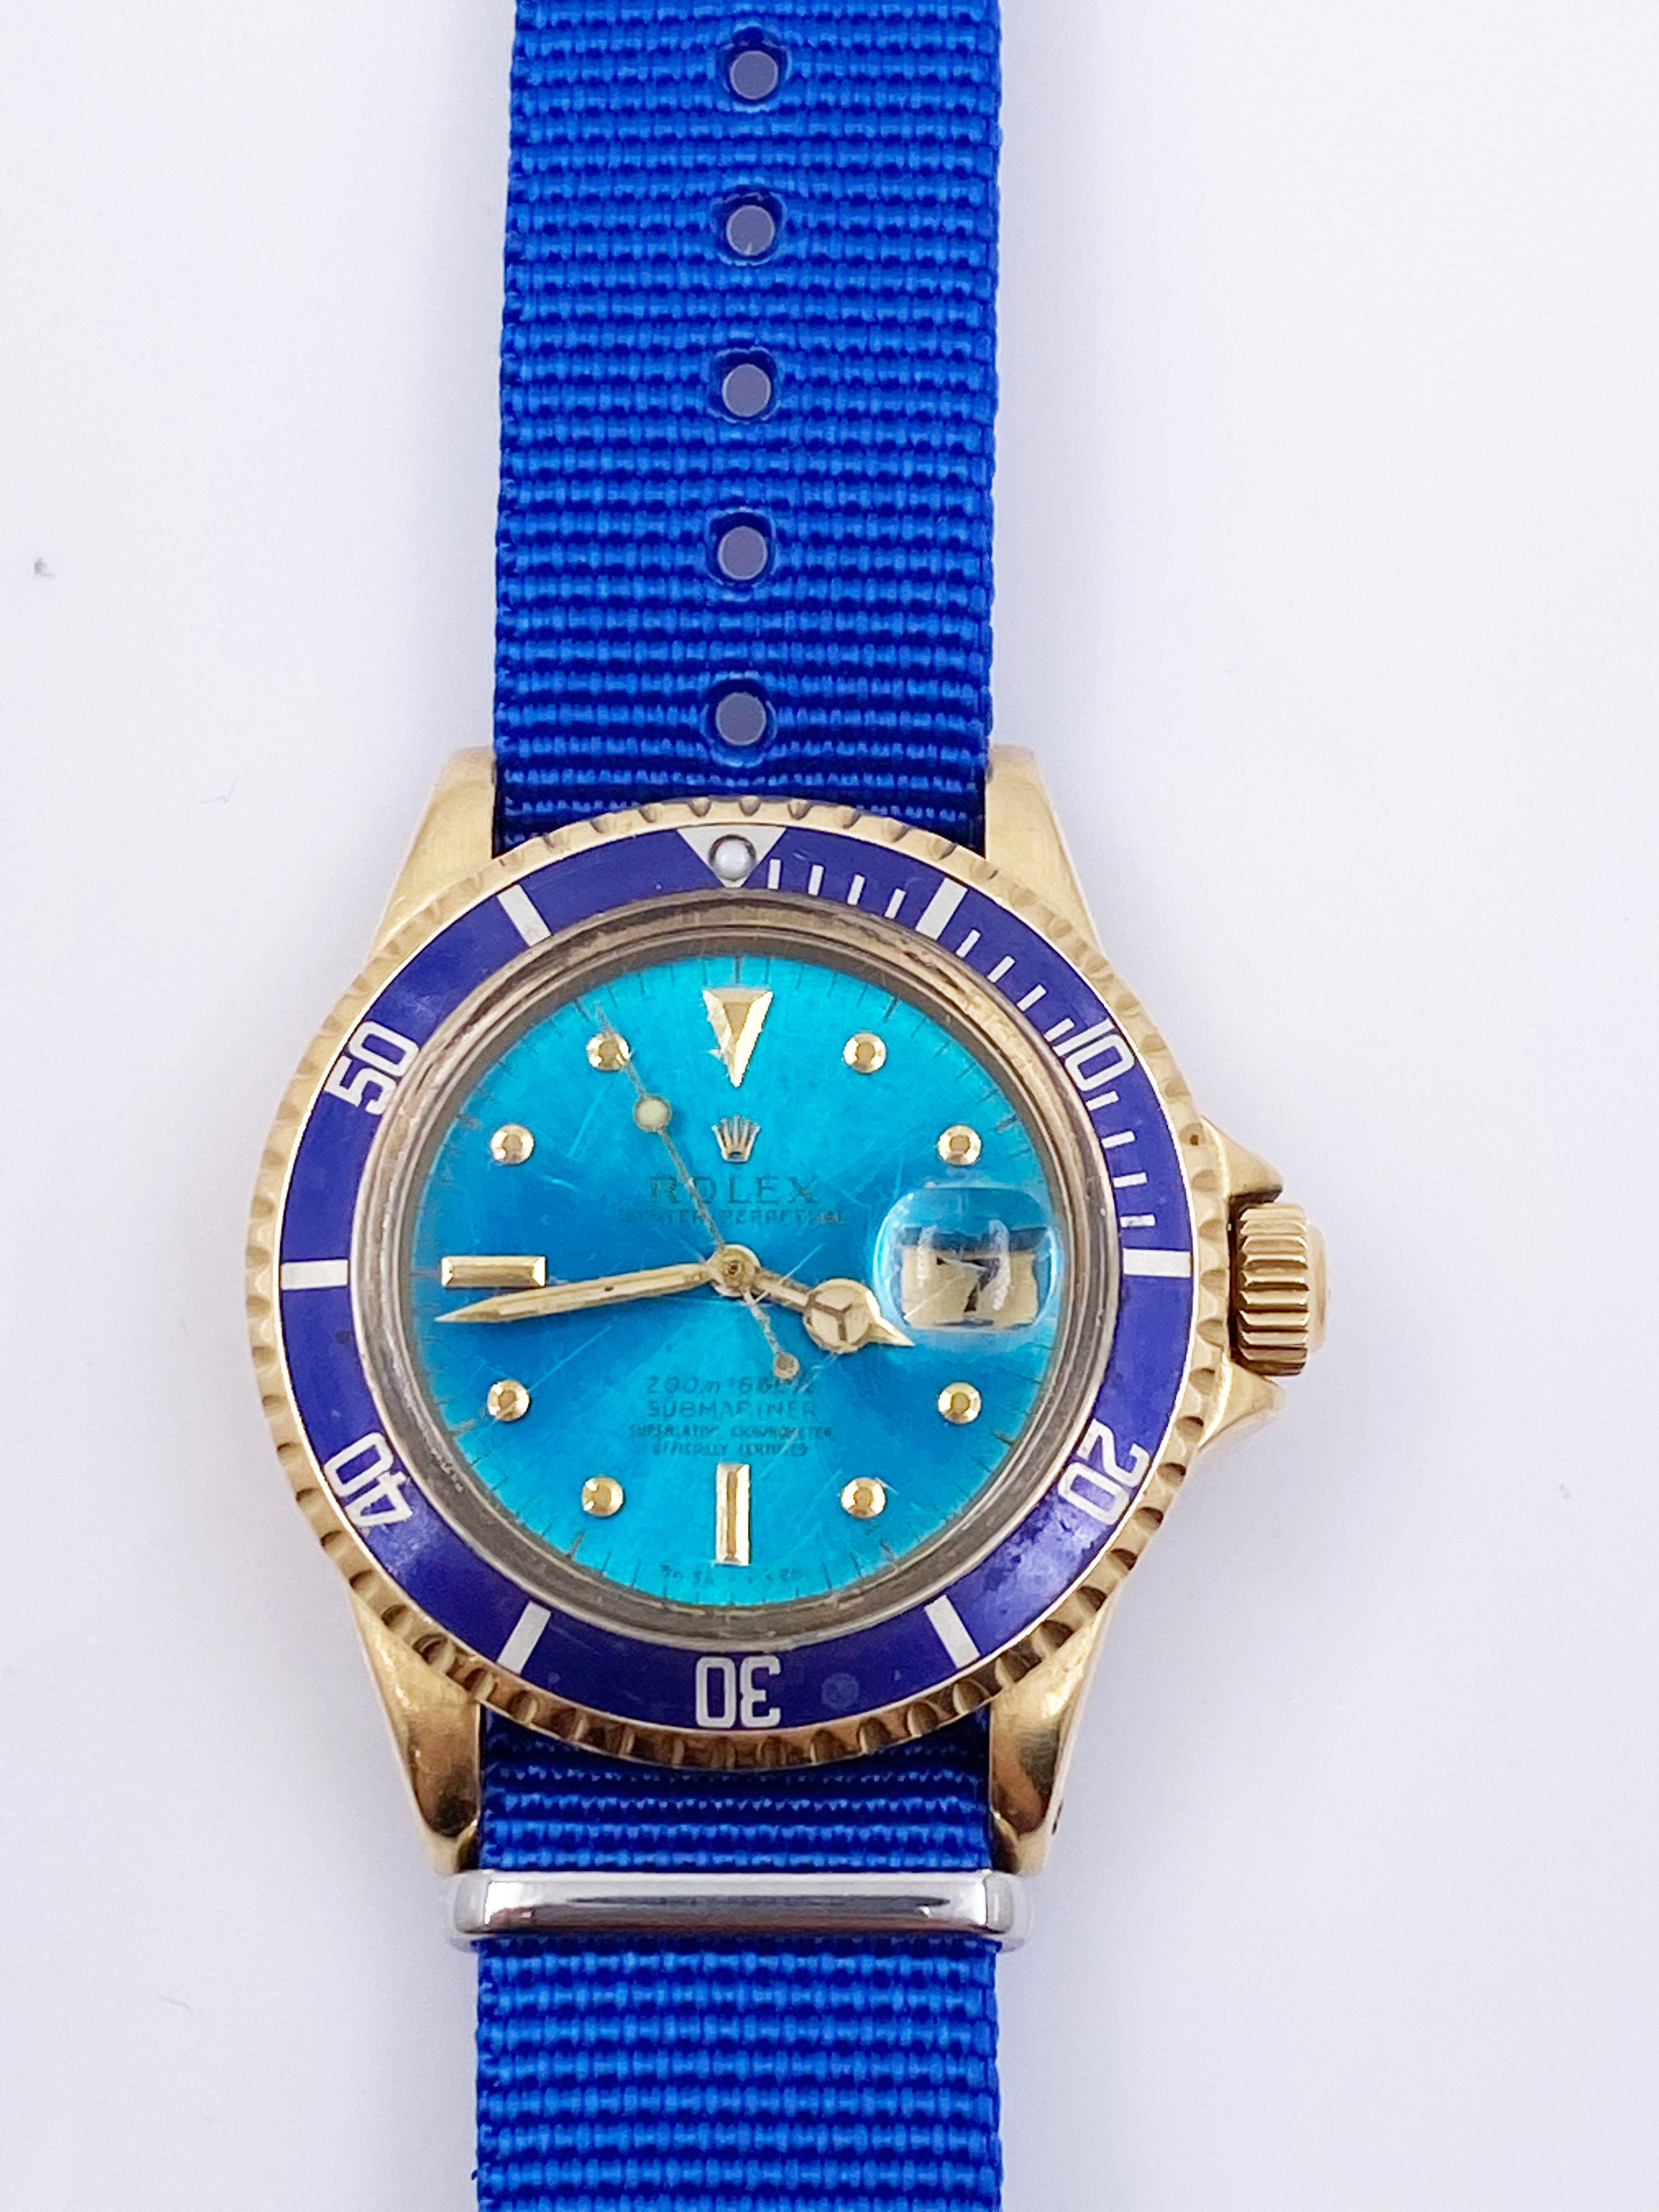 Style Number: 1680

 

Serial: 5835***



Year:1979

 

Model: Submariner 

 

Case Material: 18K Yellow Gold



Band: Custom Blue Nato Strap

 

Bezel:  Blue

 

Dial: TROPICAL NIPPLE DIAL - Blue

 

Face: Acrylic 

 

Case Size: 40mm

 

Includes: